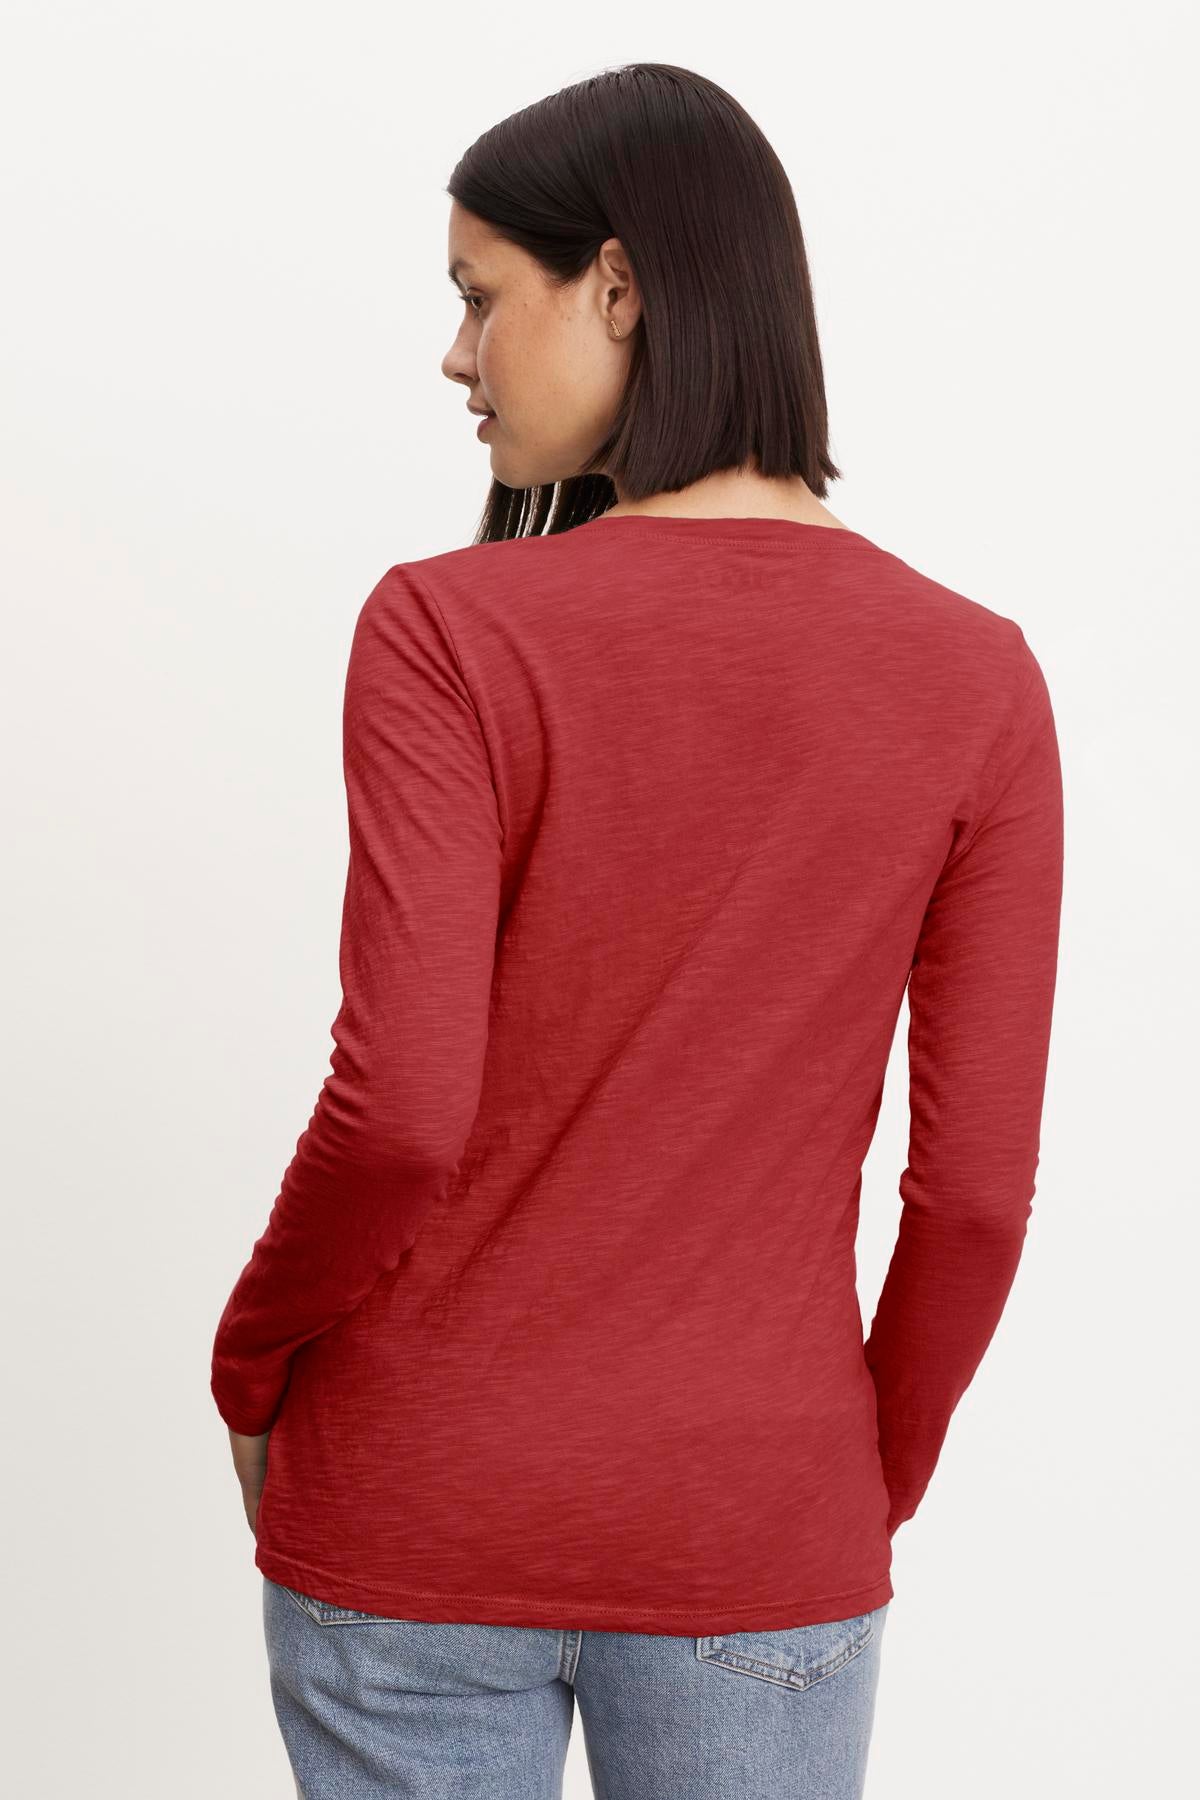   The back view of a woman wearing a red long-sleeved v-neck Blaire Original Slub Tee made from whisper-soft cotton, turning it into a forever piece by Velvet by Graham & Spencer. 